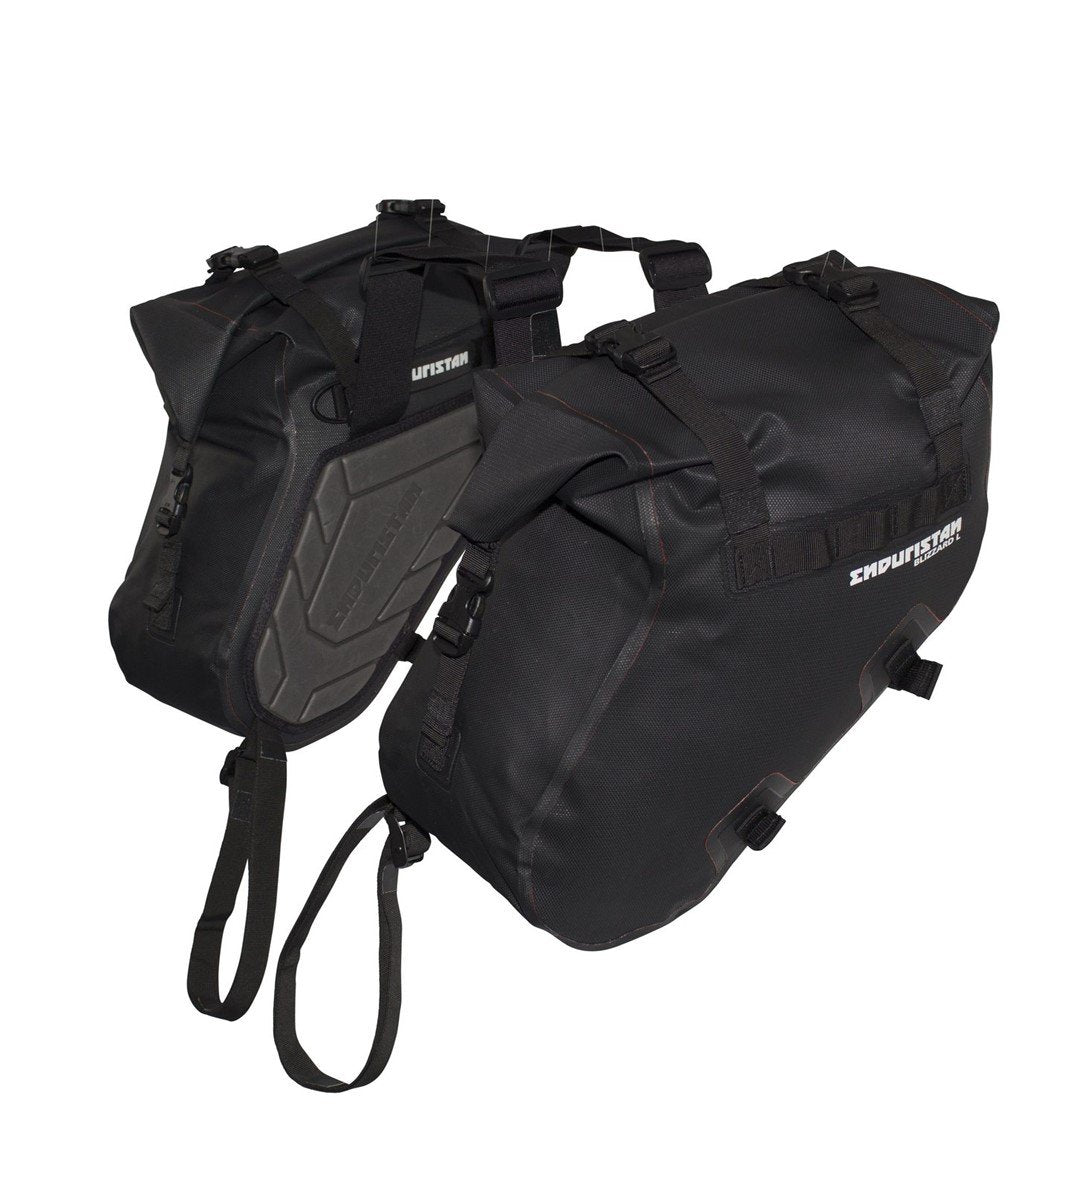 BLIZZARD SADDLE BAGS, LUSA-007-S, blizzard, enduristan, luggage, saddle bags and panniers, waterproof, Saddle Bags - Imported and distributed in North & South America by Lindeco Genuine Powersports - Premier Powersports Equipment and Accessories for Motorcycle Enthusiasts, Professional Riders and Dealers.